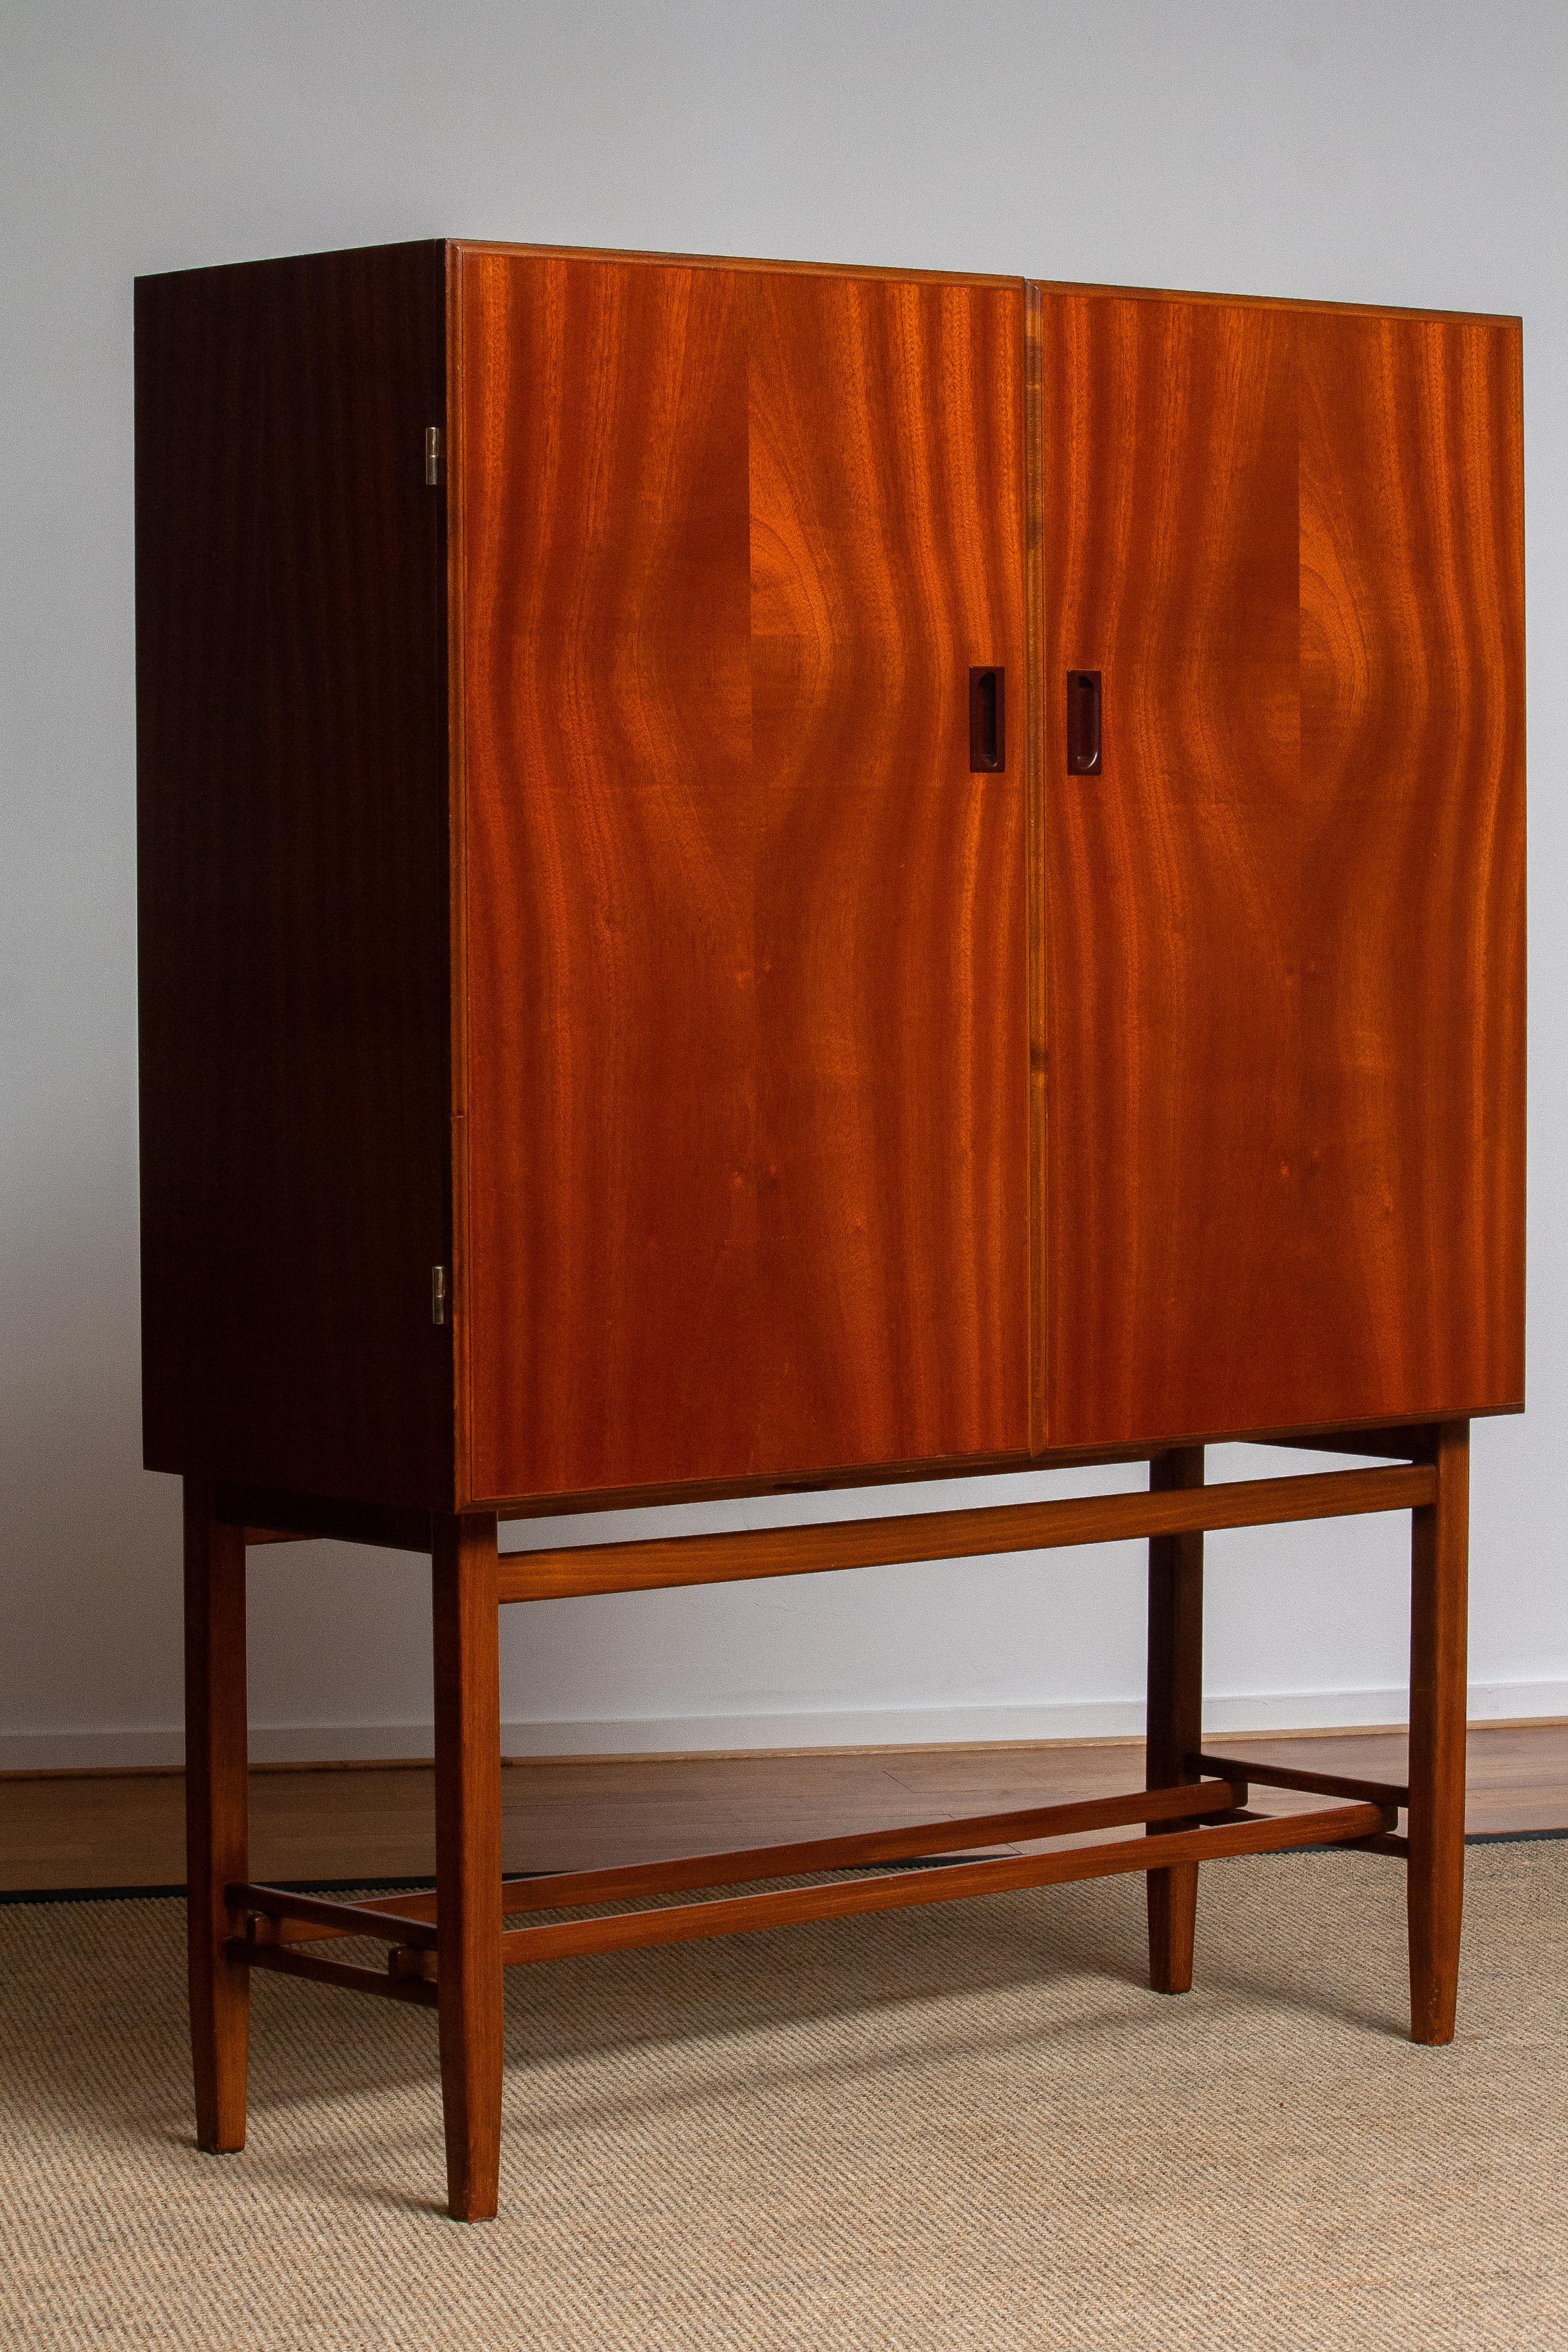 Beautiful dry bar / cabinet in mahogany made in Sweden, by Forenades Mobler of Linkoping, 1950s.
Equipped with two doors with behind two drawers and two adjustable shelves.
Standing on slim and tall legs.

The overall condition is very good.